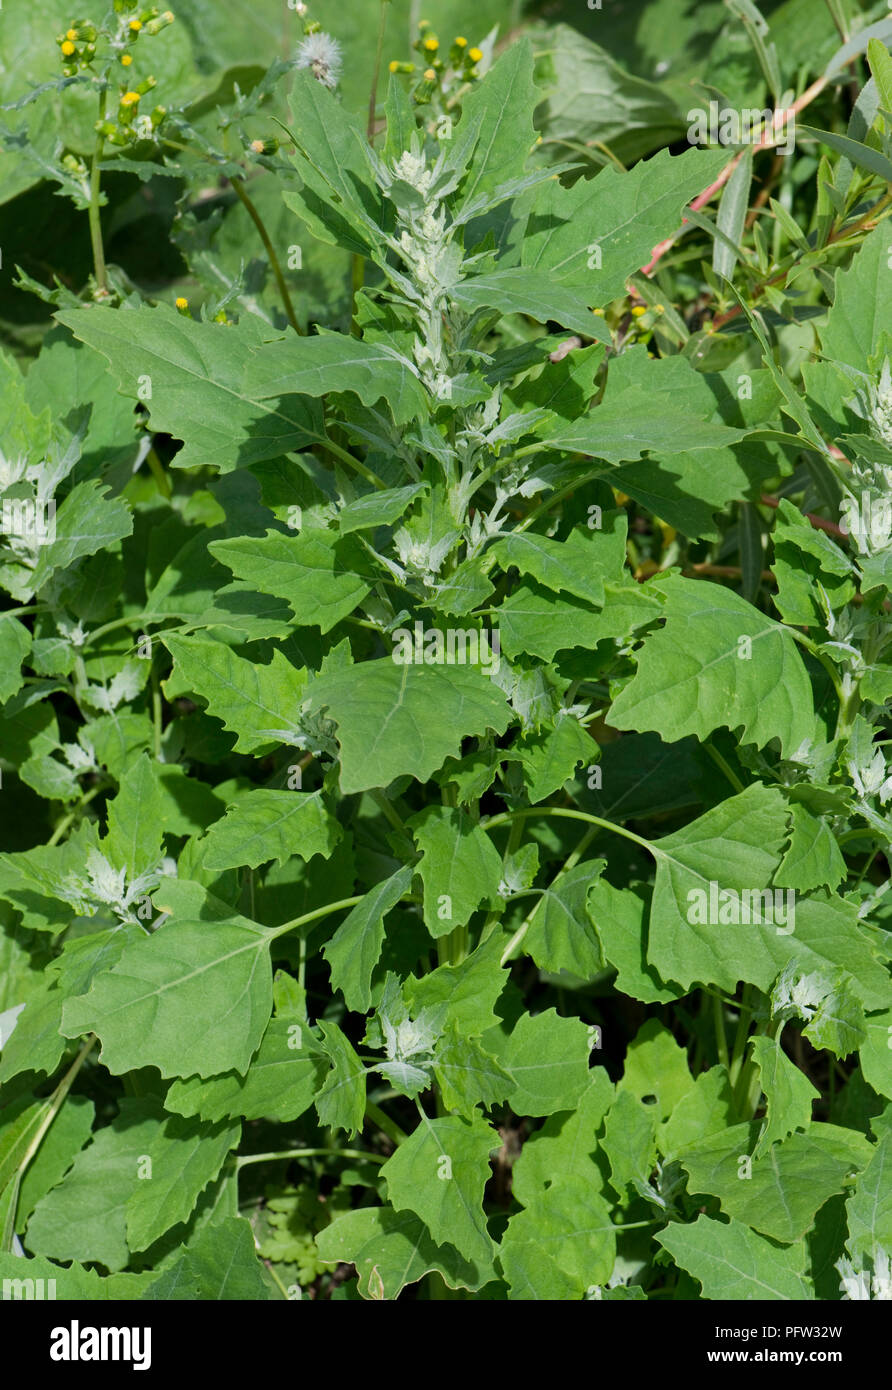 Fat hen or pigweed, Chenopodium album, plant at stem extension with early flower buds, Berkshire, June Stock Photo